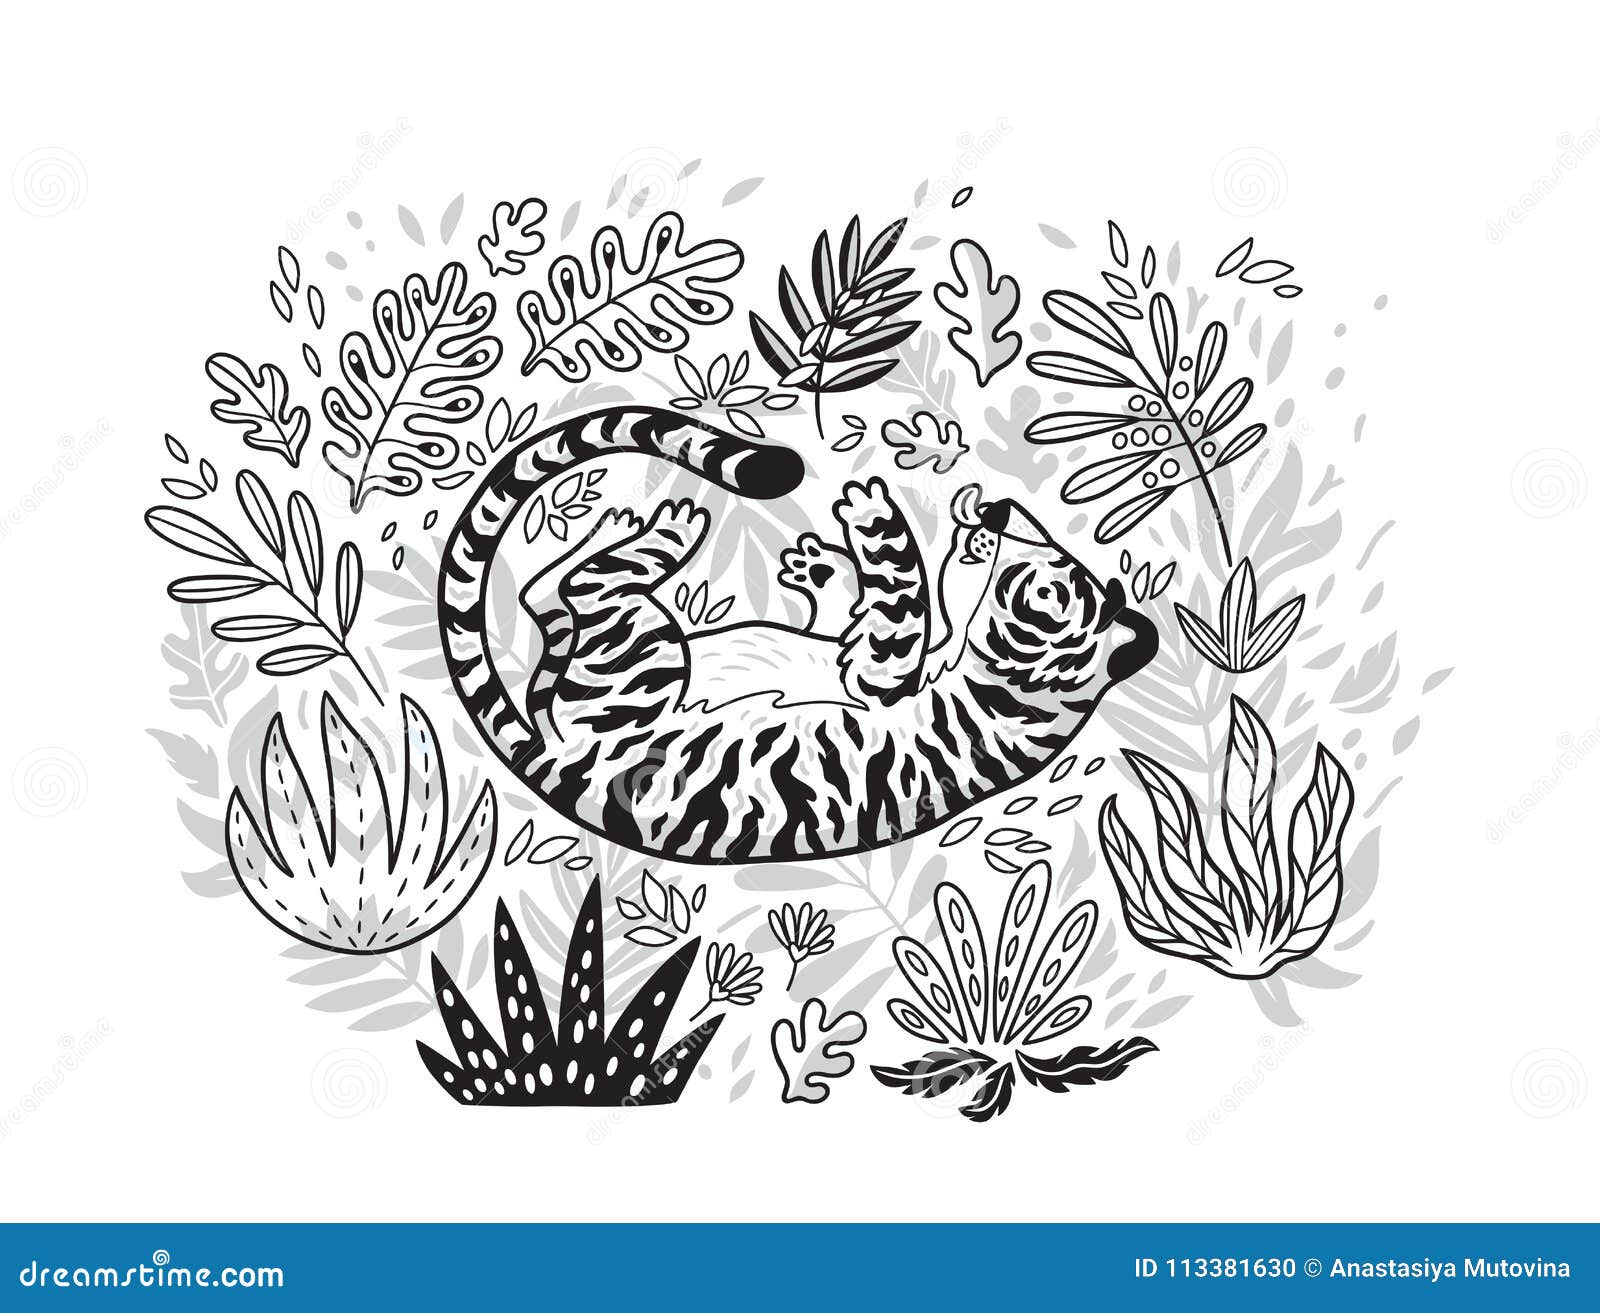 https://thumbs.dreamstime.com/z/cute-cartoon-tiger-playing-leaf-jungle-black-white-contour-print-ideal-posters-cards-apparel-design-coloring-113381630.jpg